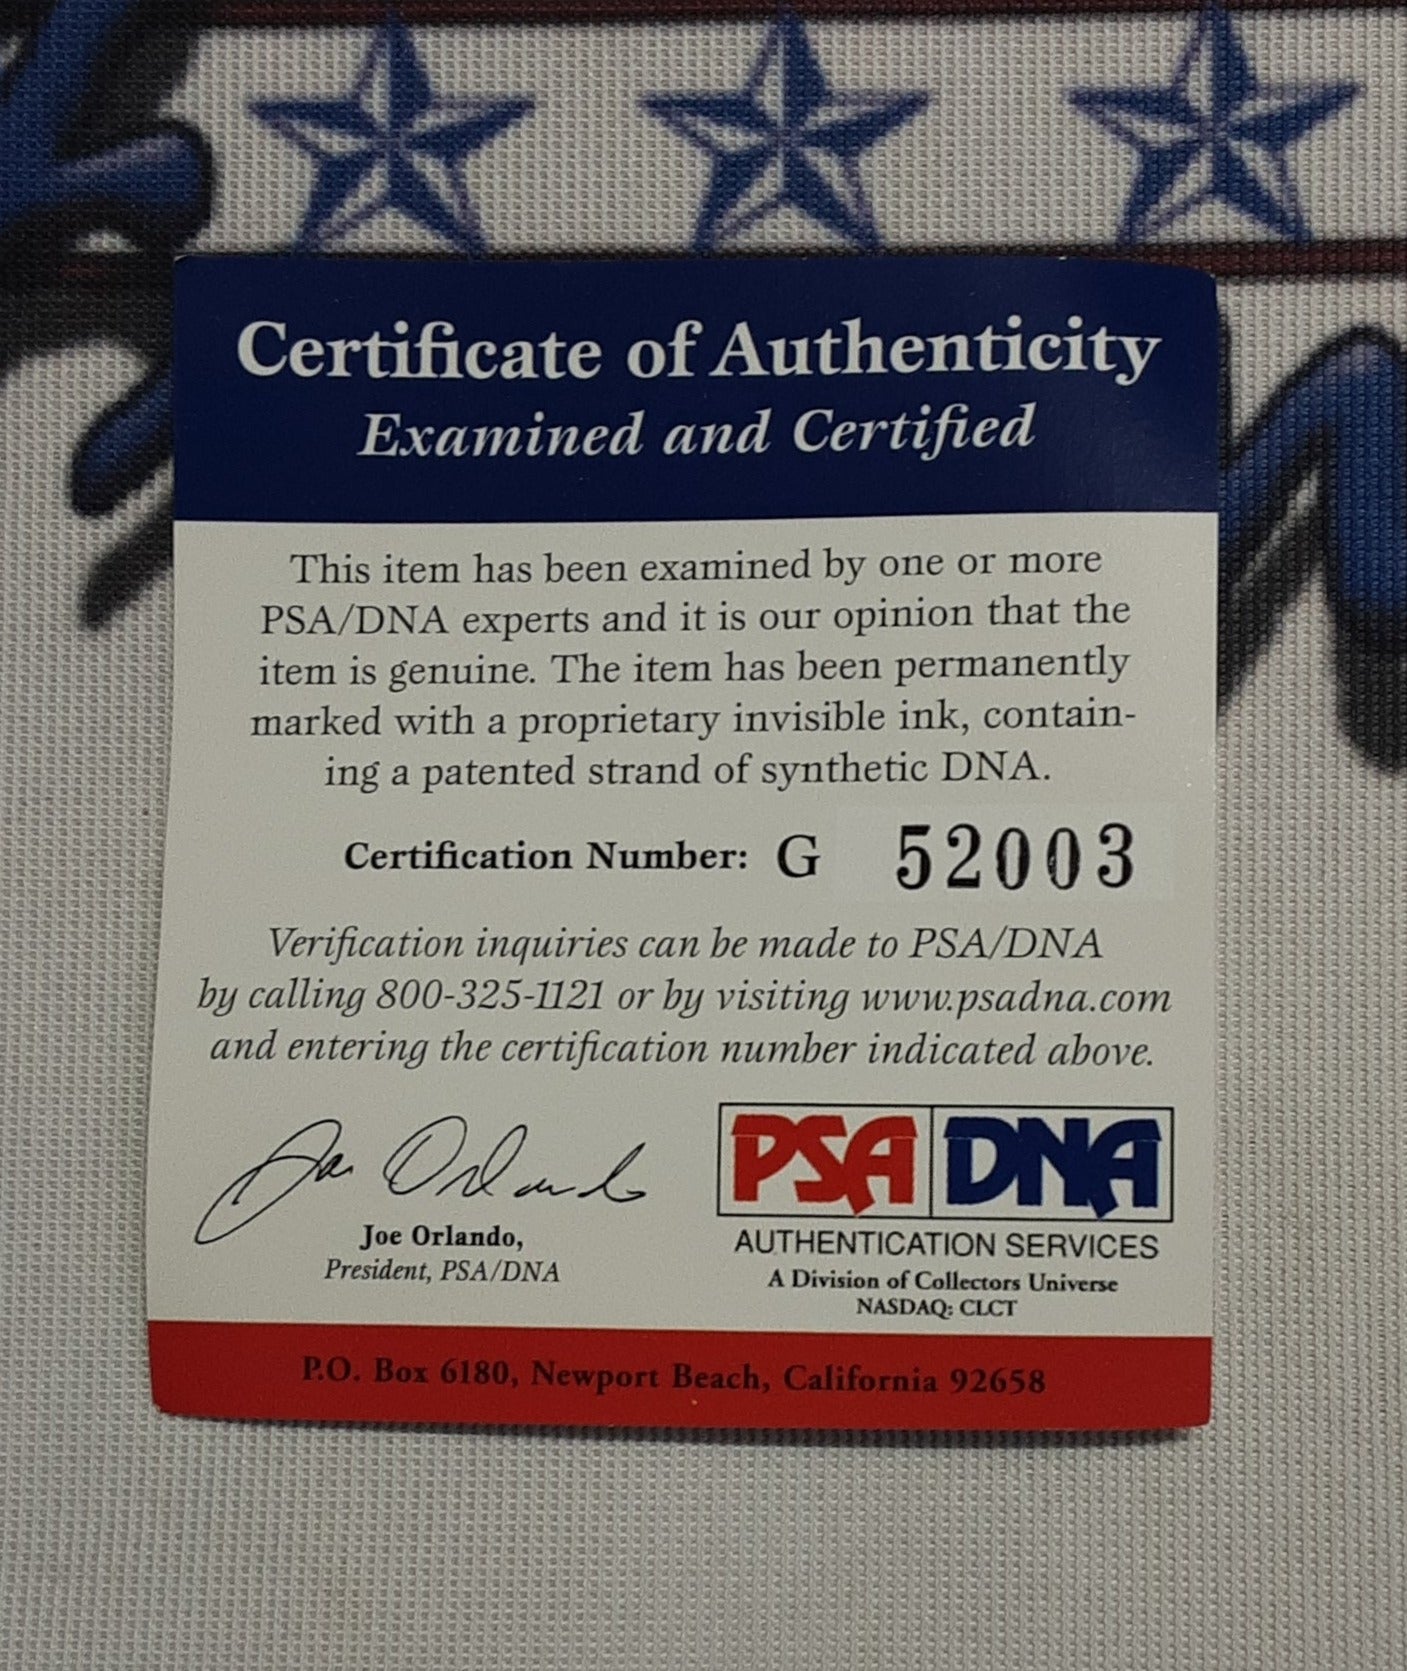 Tony Gwynn Authentic Signed Baseball Autographed with Inscription PSA/DNA